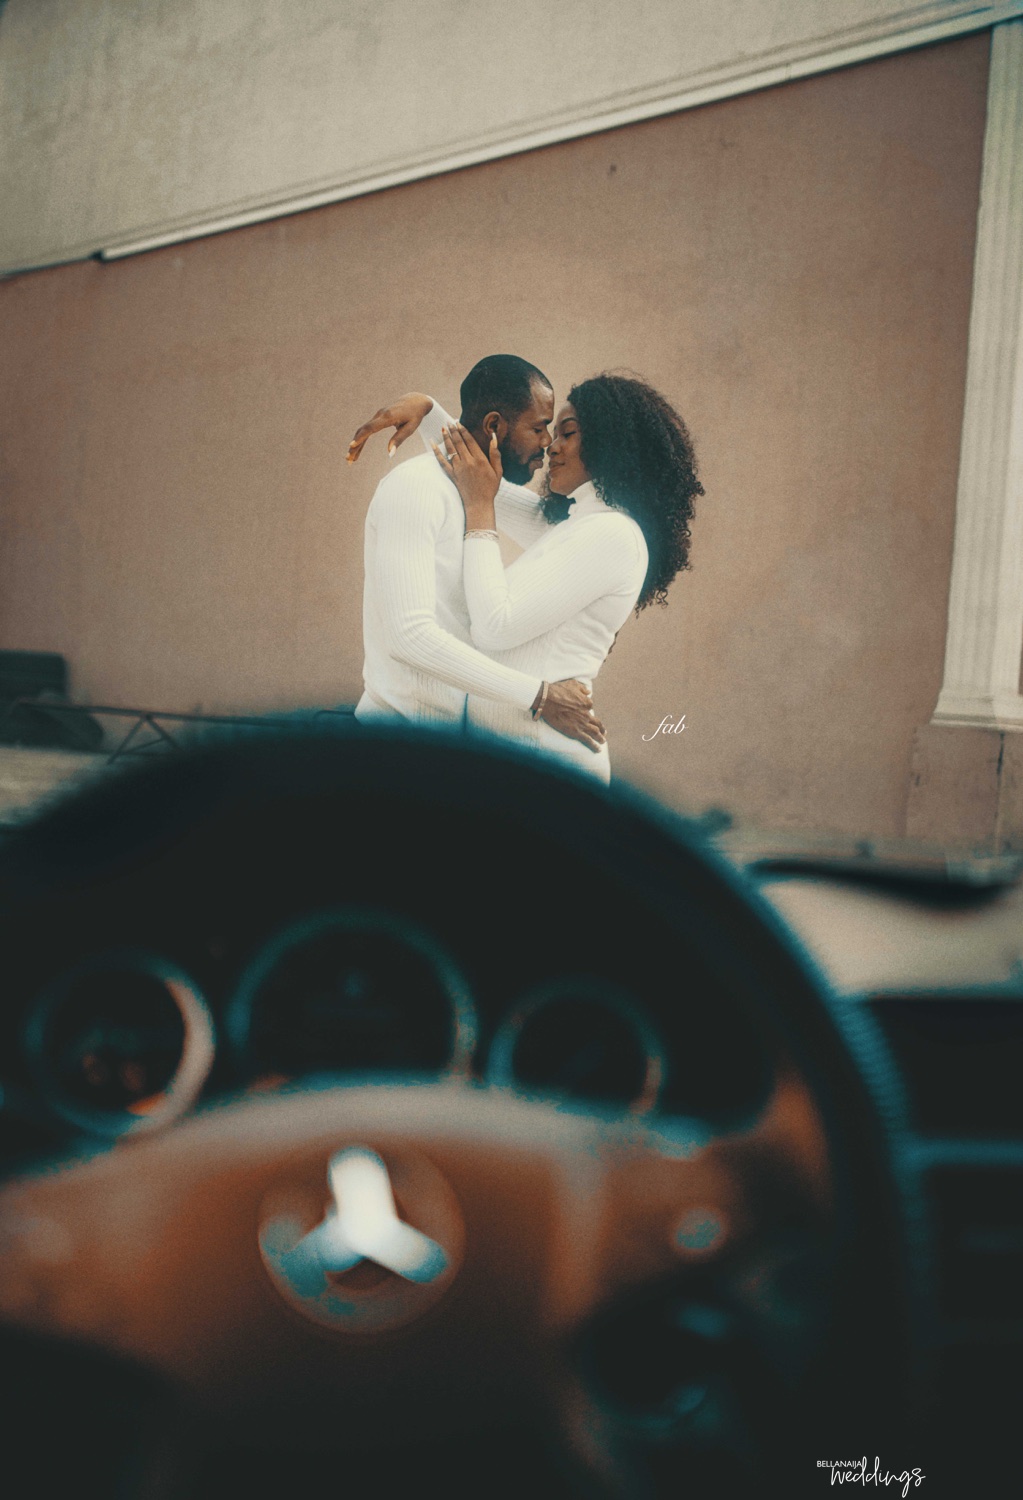 Our Love is Forever! Ehis & Chinonye's All-white Pre-wedding Shoot